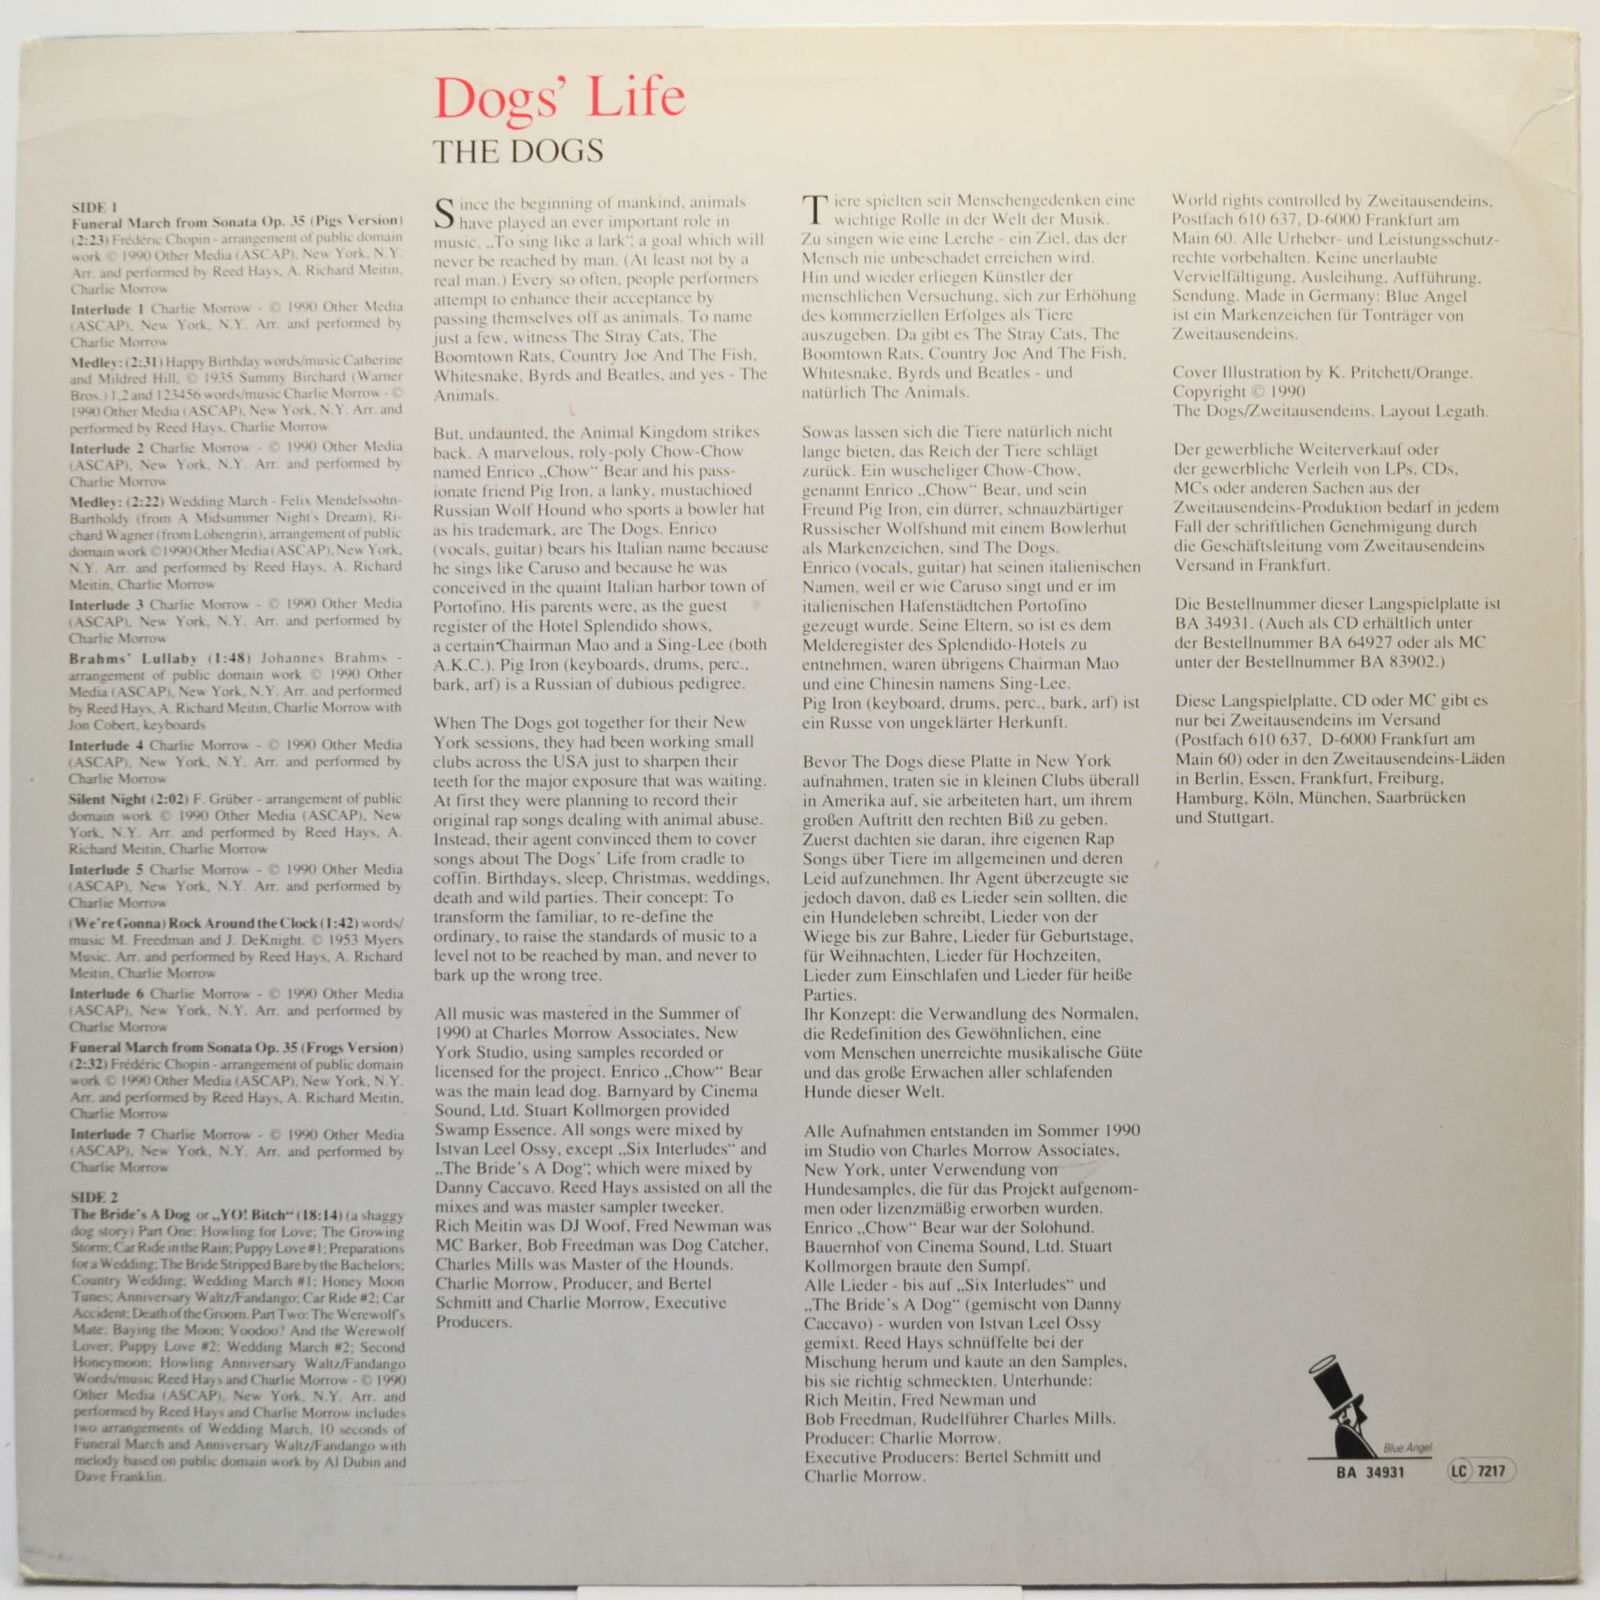 Dogs — Dogs' Life, 1990